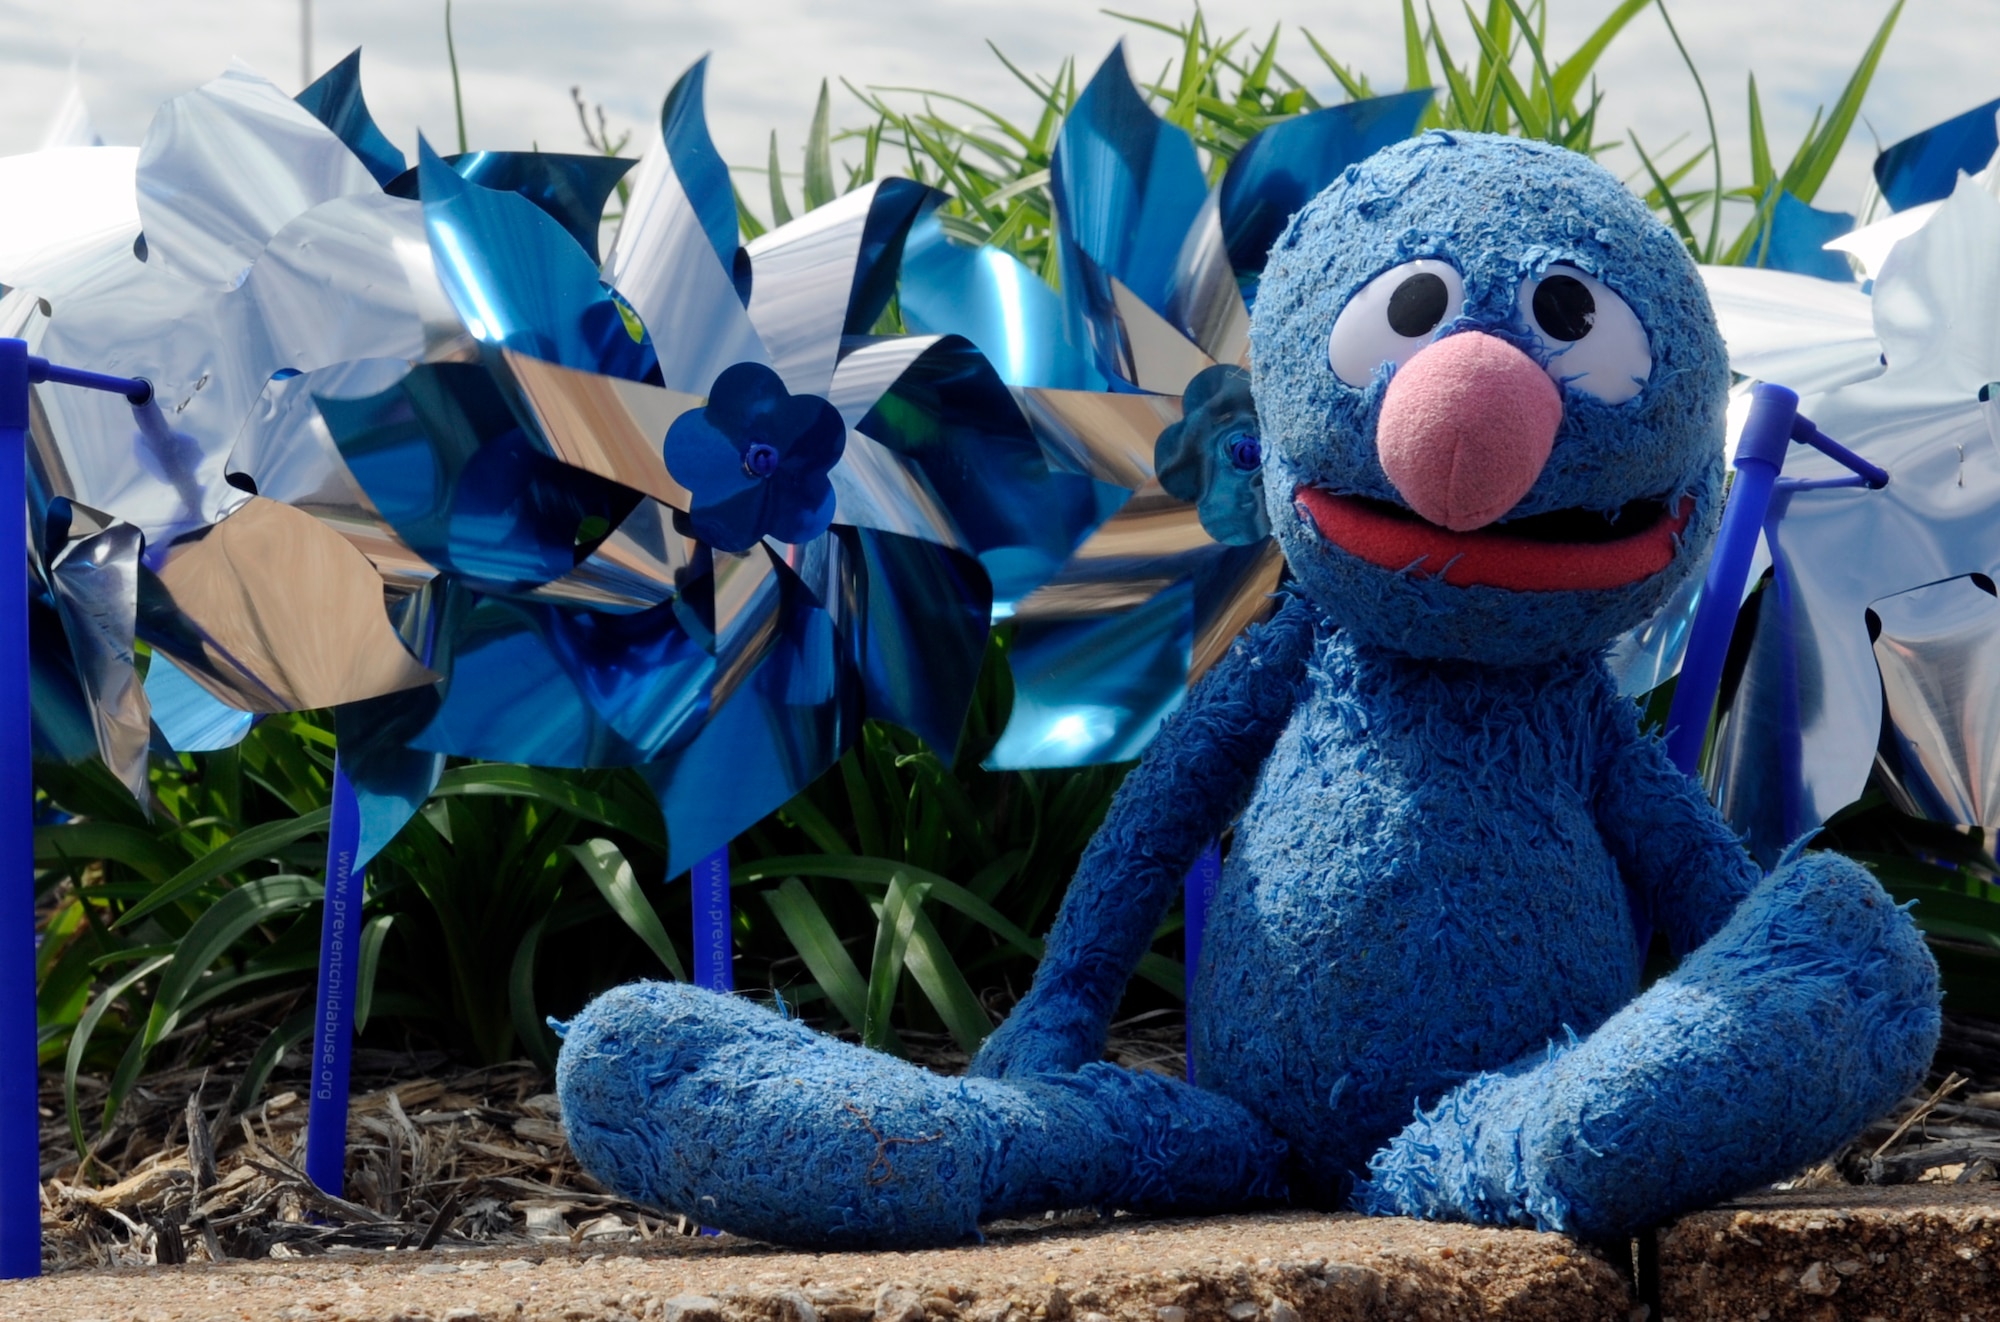 A stuffed animal of Grover from Sesame Street sits in front of blue and silver pinwheels at Whiteman air Force Base, Mo., April 14, 2015. Staff Sgt. Alexandra M. Longfellow, 509th Bomb Wing Public Affairs photojournalist, received Grover from a police officer on the night she was taken out of an abusive home.  April is Child Abuse Prevention Month and the pinwheel is a symbol for healthy starts for all children. (U.S. Air Force photo by Staff Sgt. Alexandra M. Longfellow/Released)